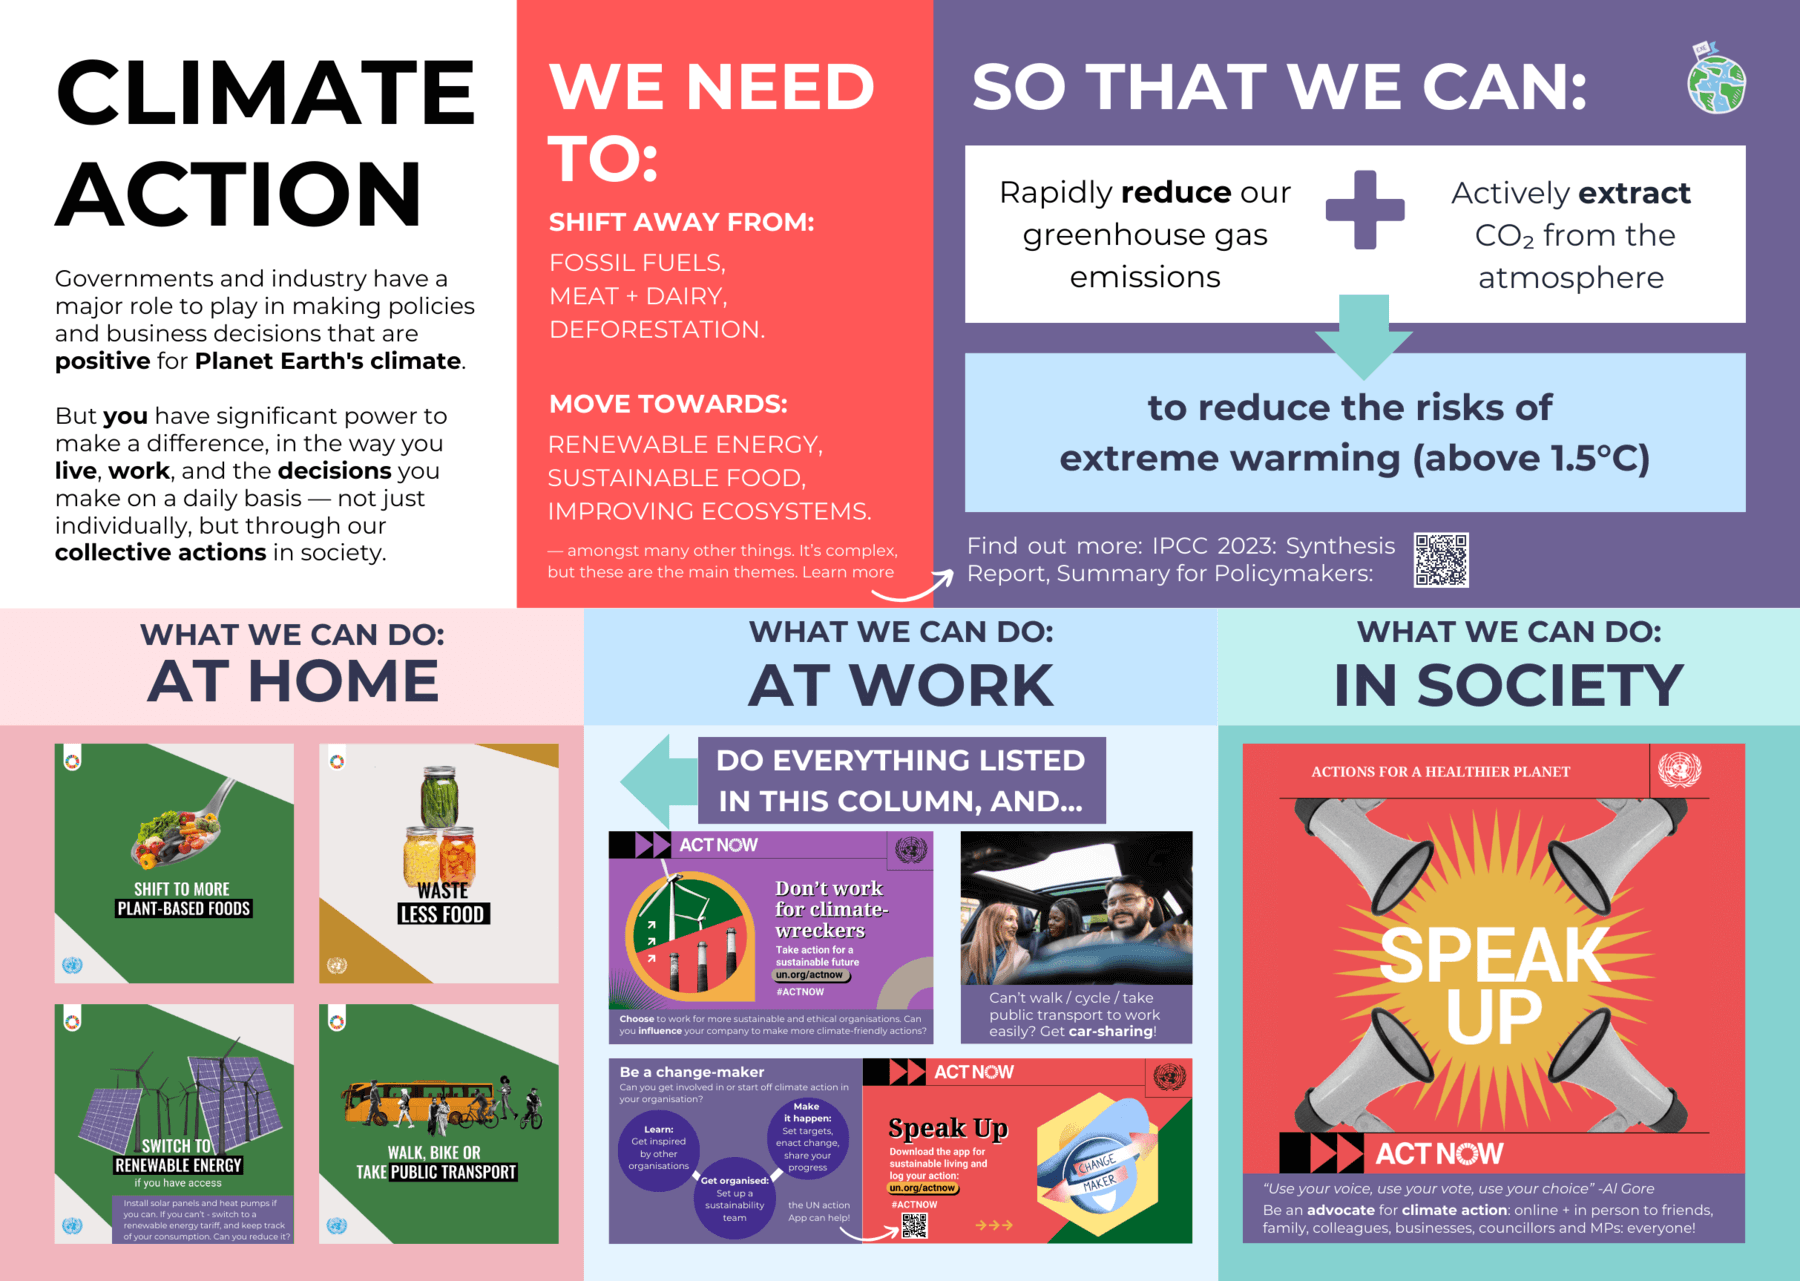 Infographic titled "Climate Action" that advocates for changes at home, work, and society to address climate change. It highlights the need to shift away from fossil fuels, meat and dairy, and deforestation, moving towards renewable energy, sustainable food, and improved ecosystems to rapidly reduce greenhouse gas emissions and actively extract CO2 from the atmosphere. This is aimed at reducing the risks of extreme warming above 1.5°C. Recommendations for home include shifting to plant-based foods and reducing waste. For the workplace, it suggests not working for climate-wreckers and advocating for eco-friendly practices. Society-wide actions emphasize speaking up for climate action. The infographic encourages collective actions and provides a reference to the IPCC 2023 report for more information.